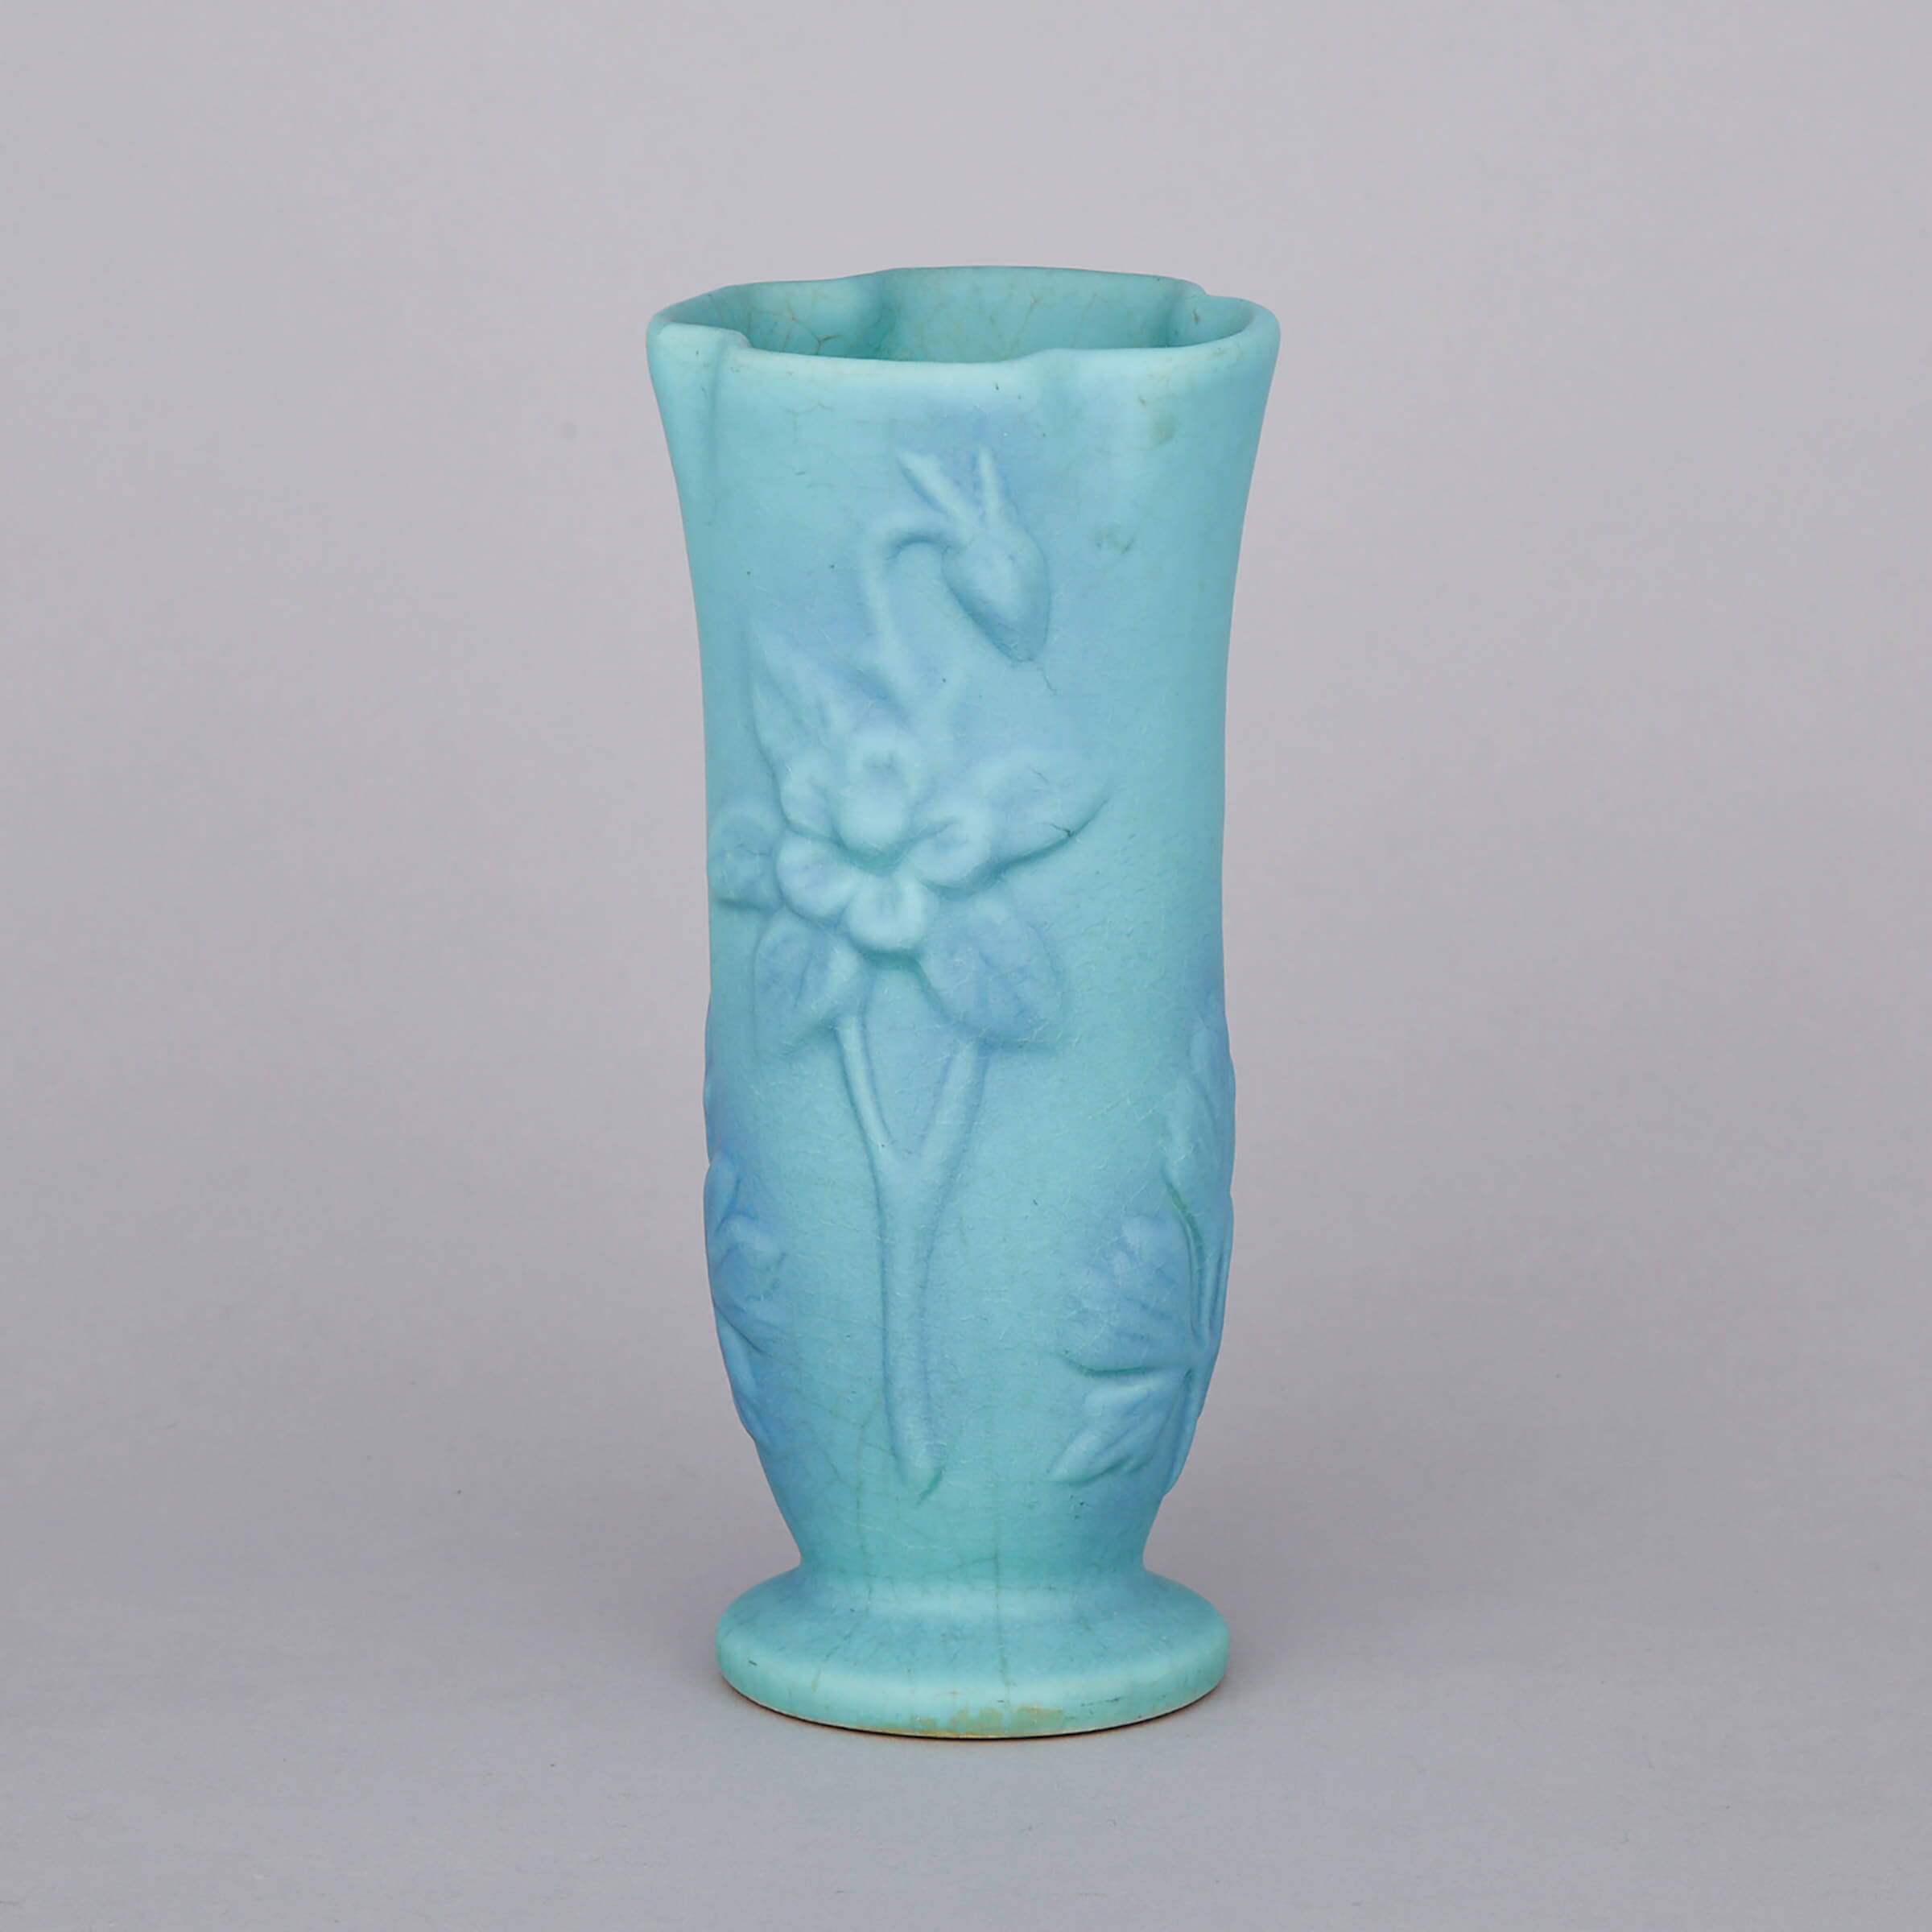 Van Briggle Moulded and Blue Glazed Vase, early 20th century